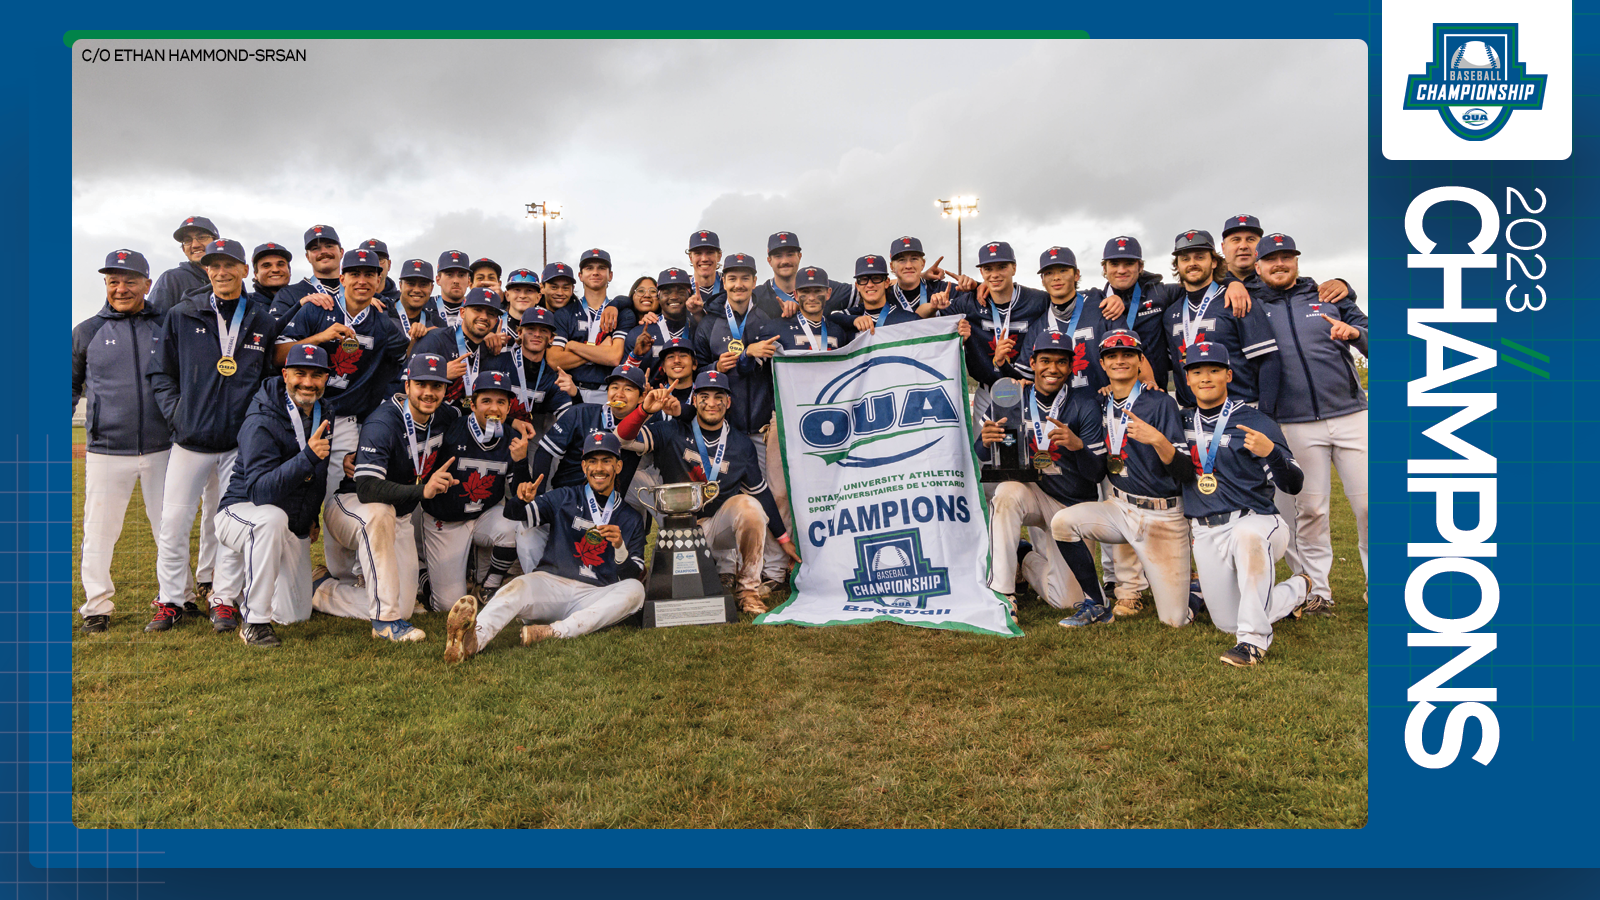 Predominantly blue graphic covered mostly by 2023 OUA Baseball Championship banner photo, with the corresponding championship logo and white text reading '2023 Champions' on the right side